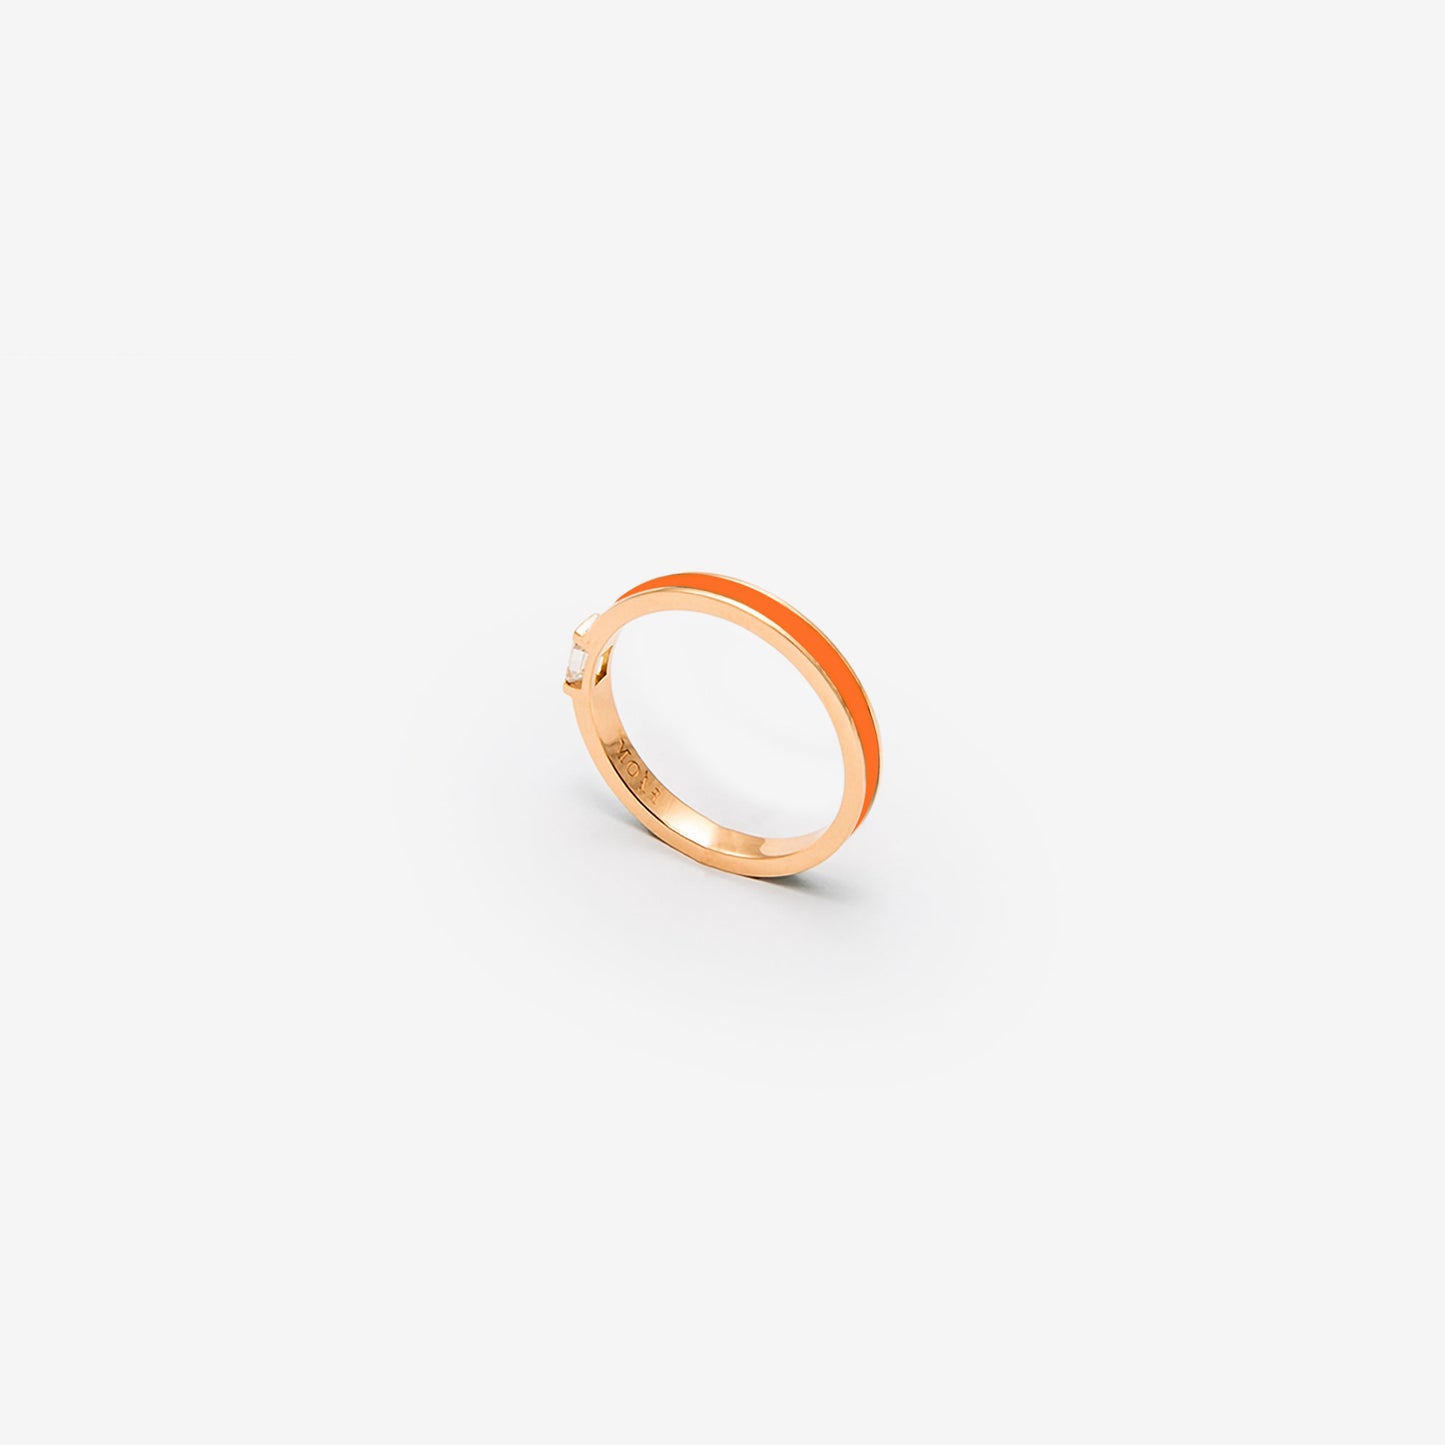 Rose gold band with orange enamel and a diamond